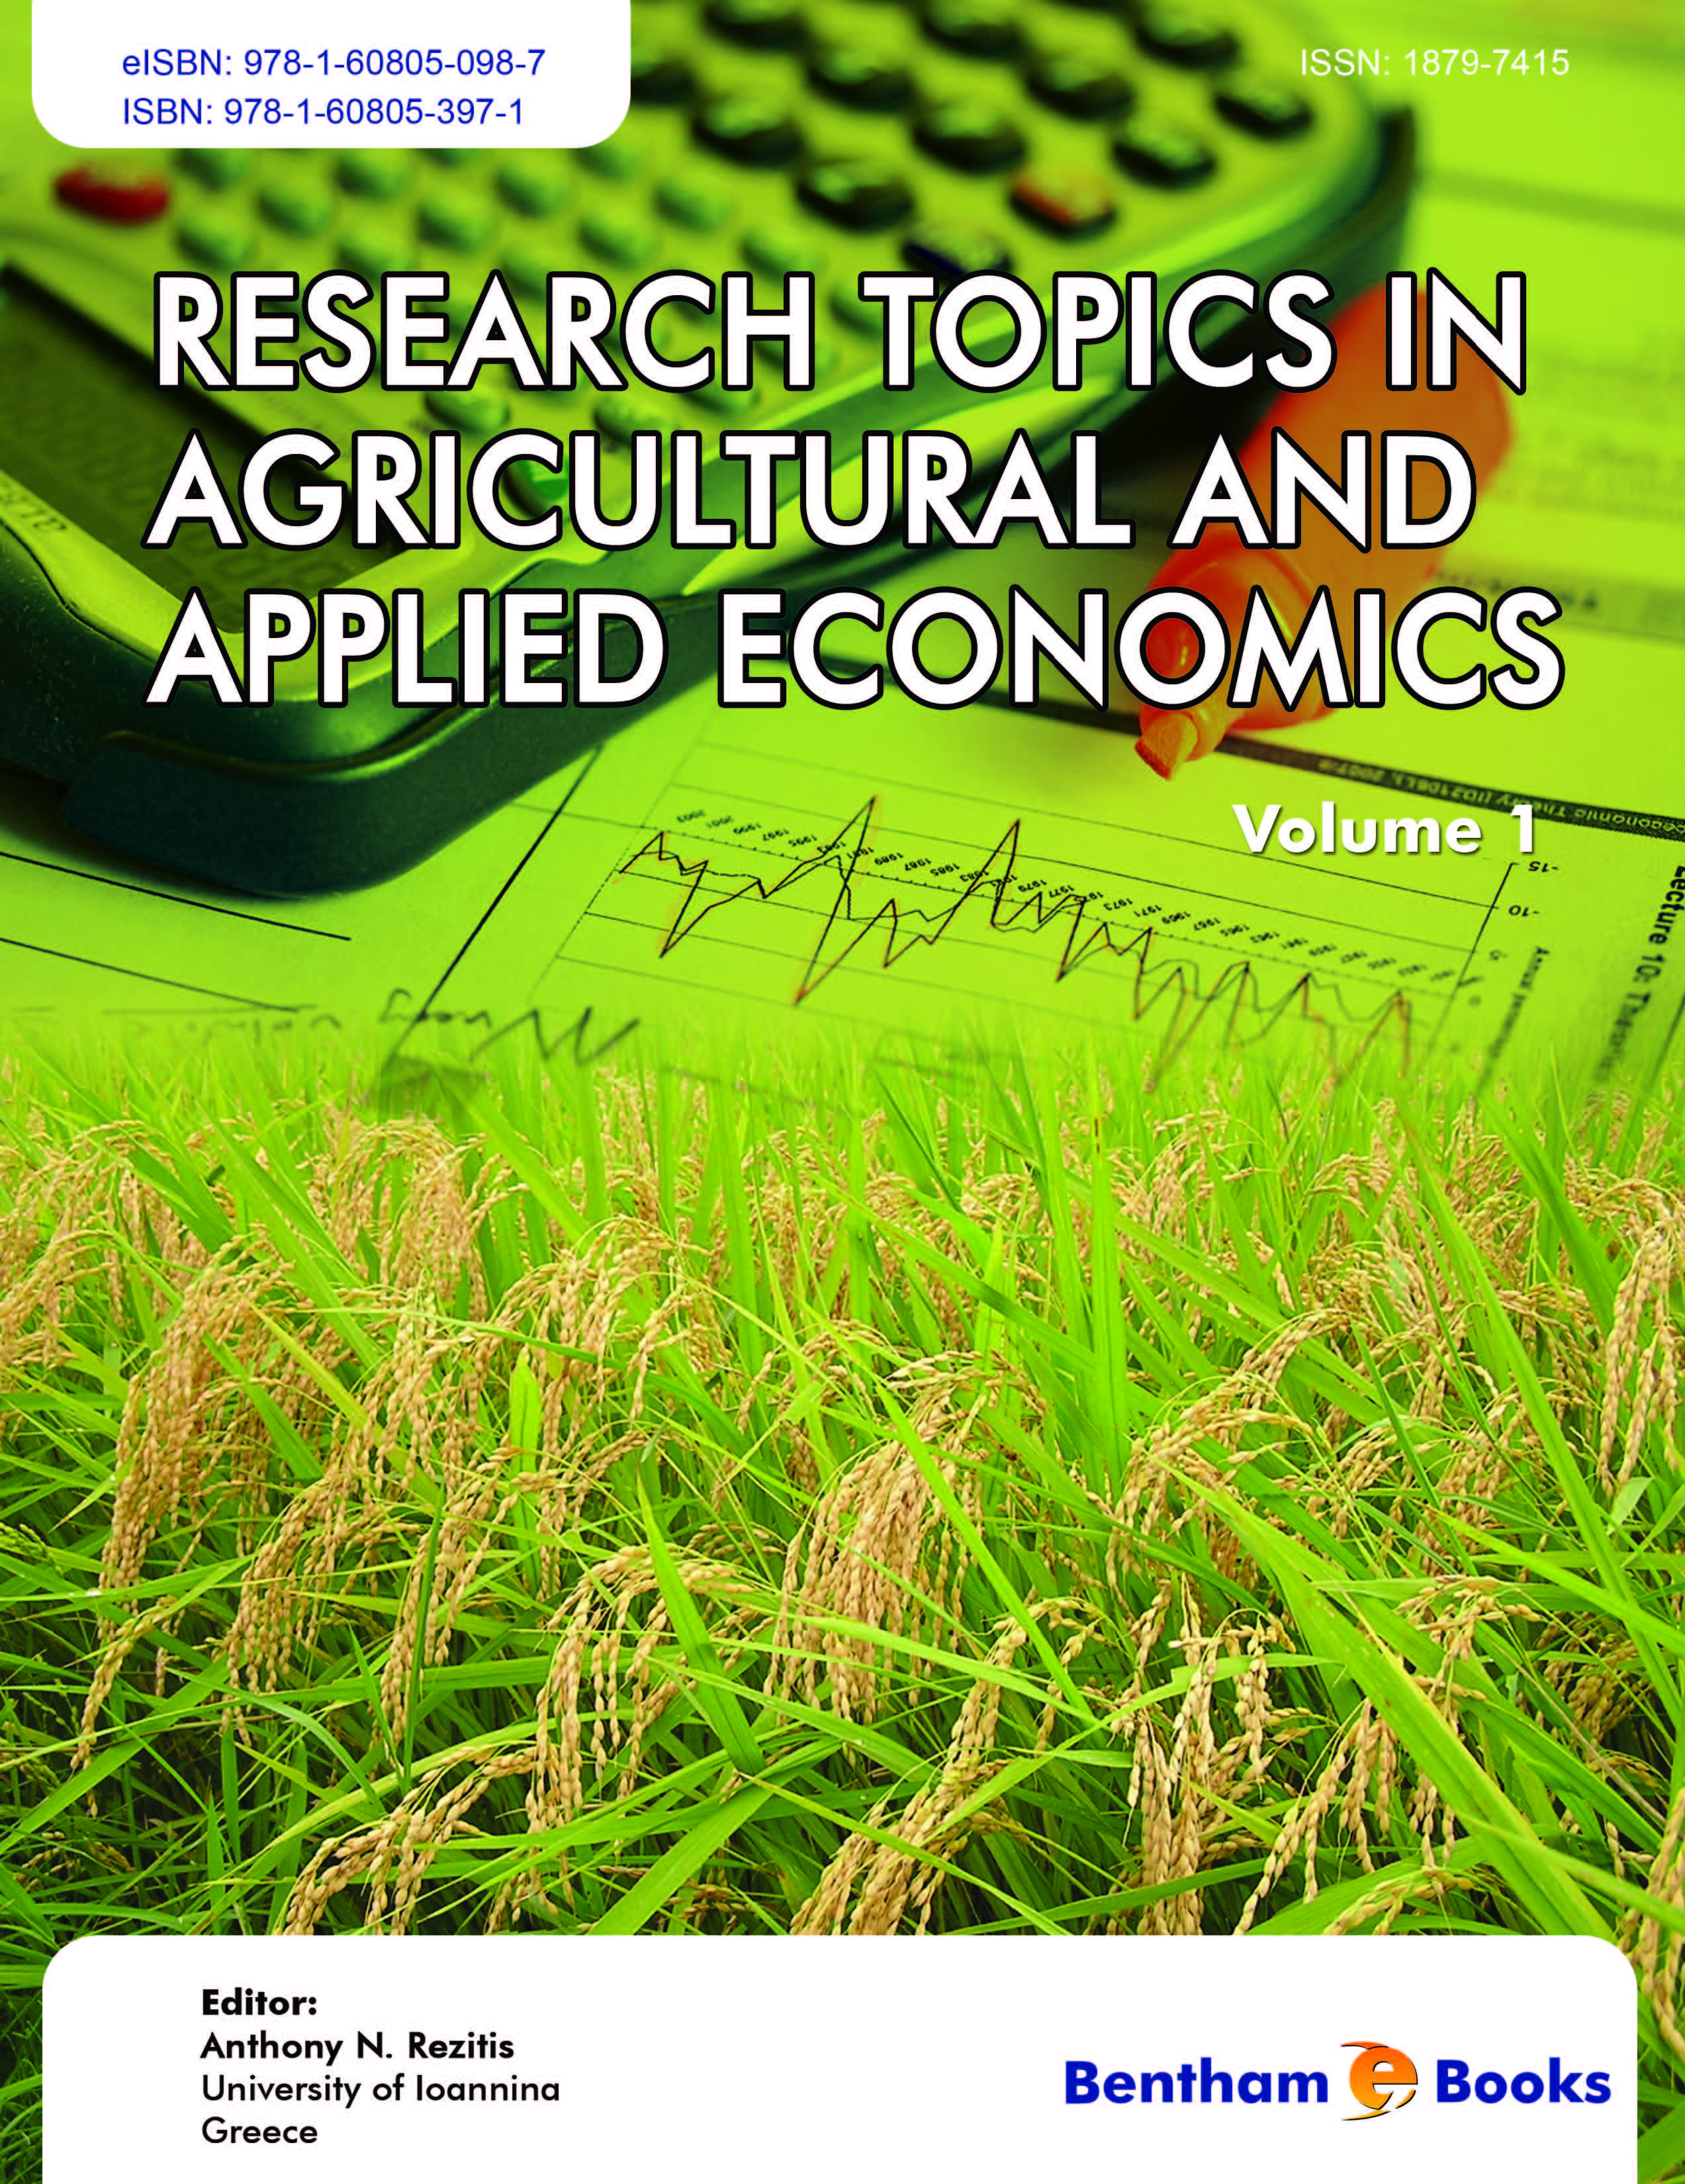 Research Topics in Agricultural and Applied Economics